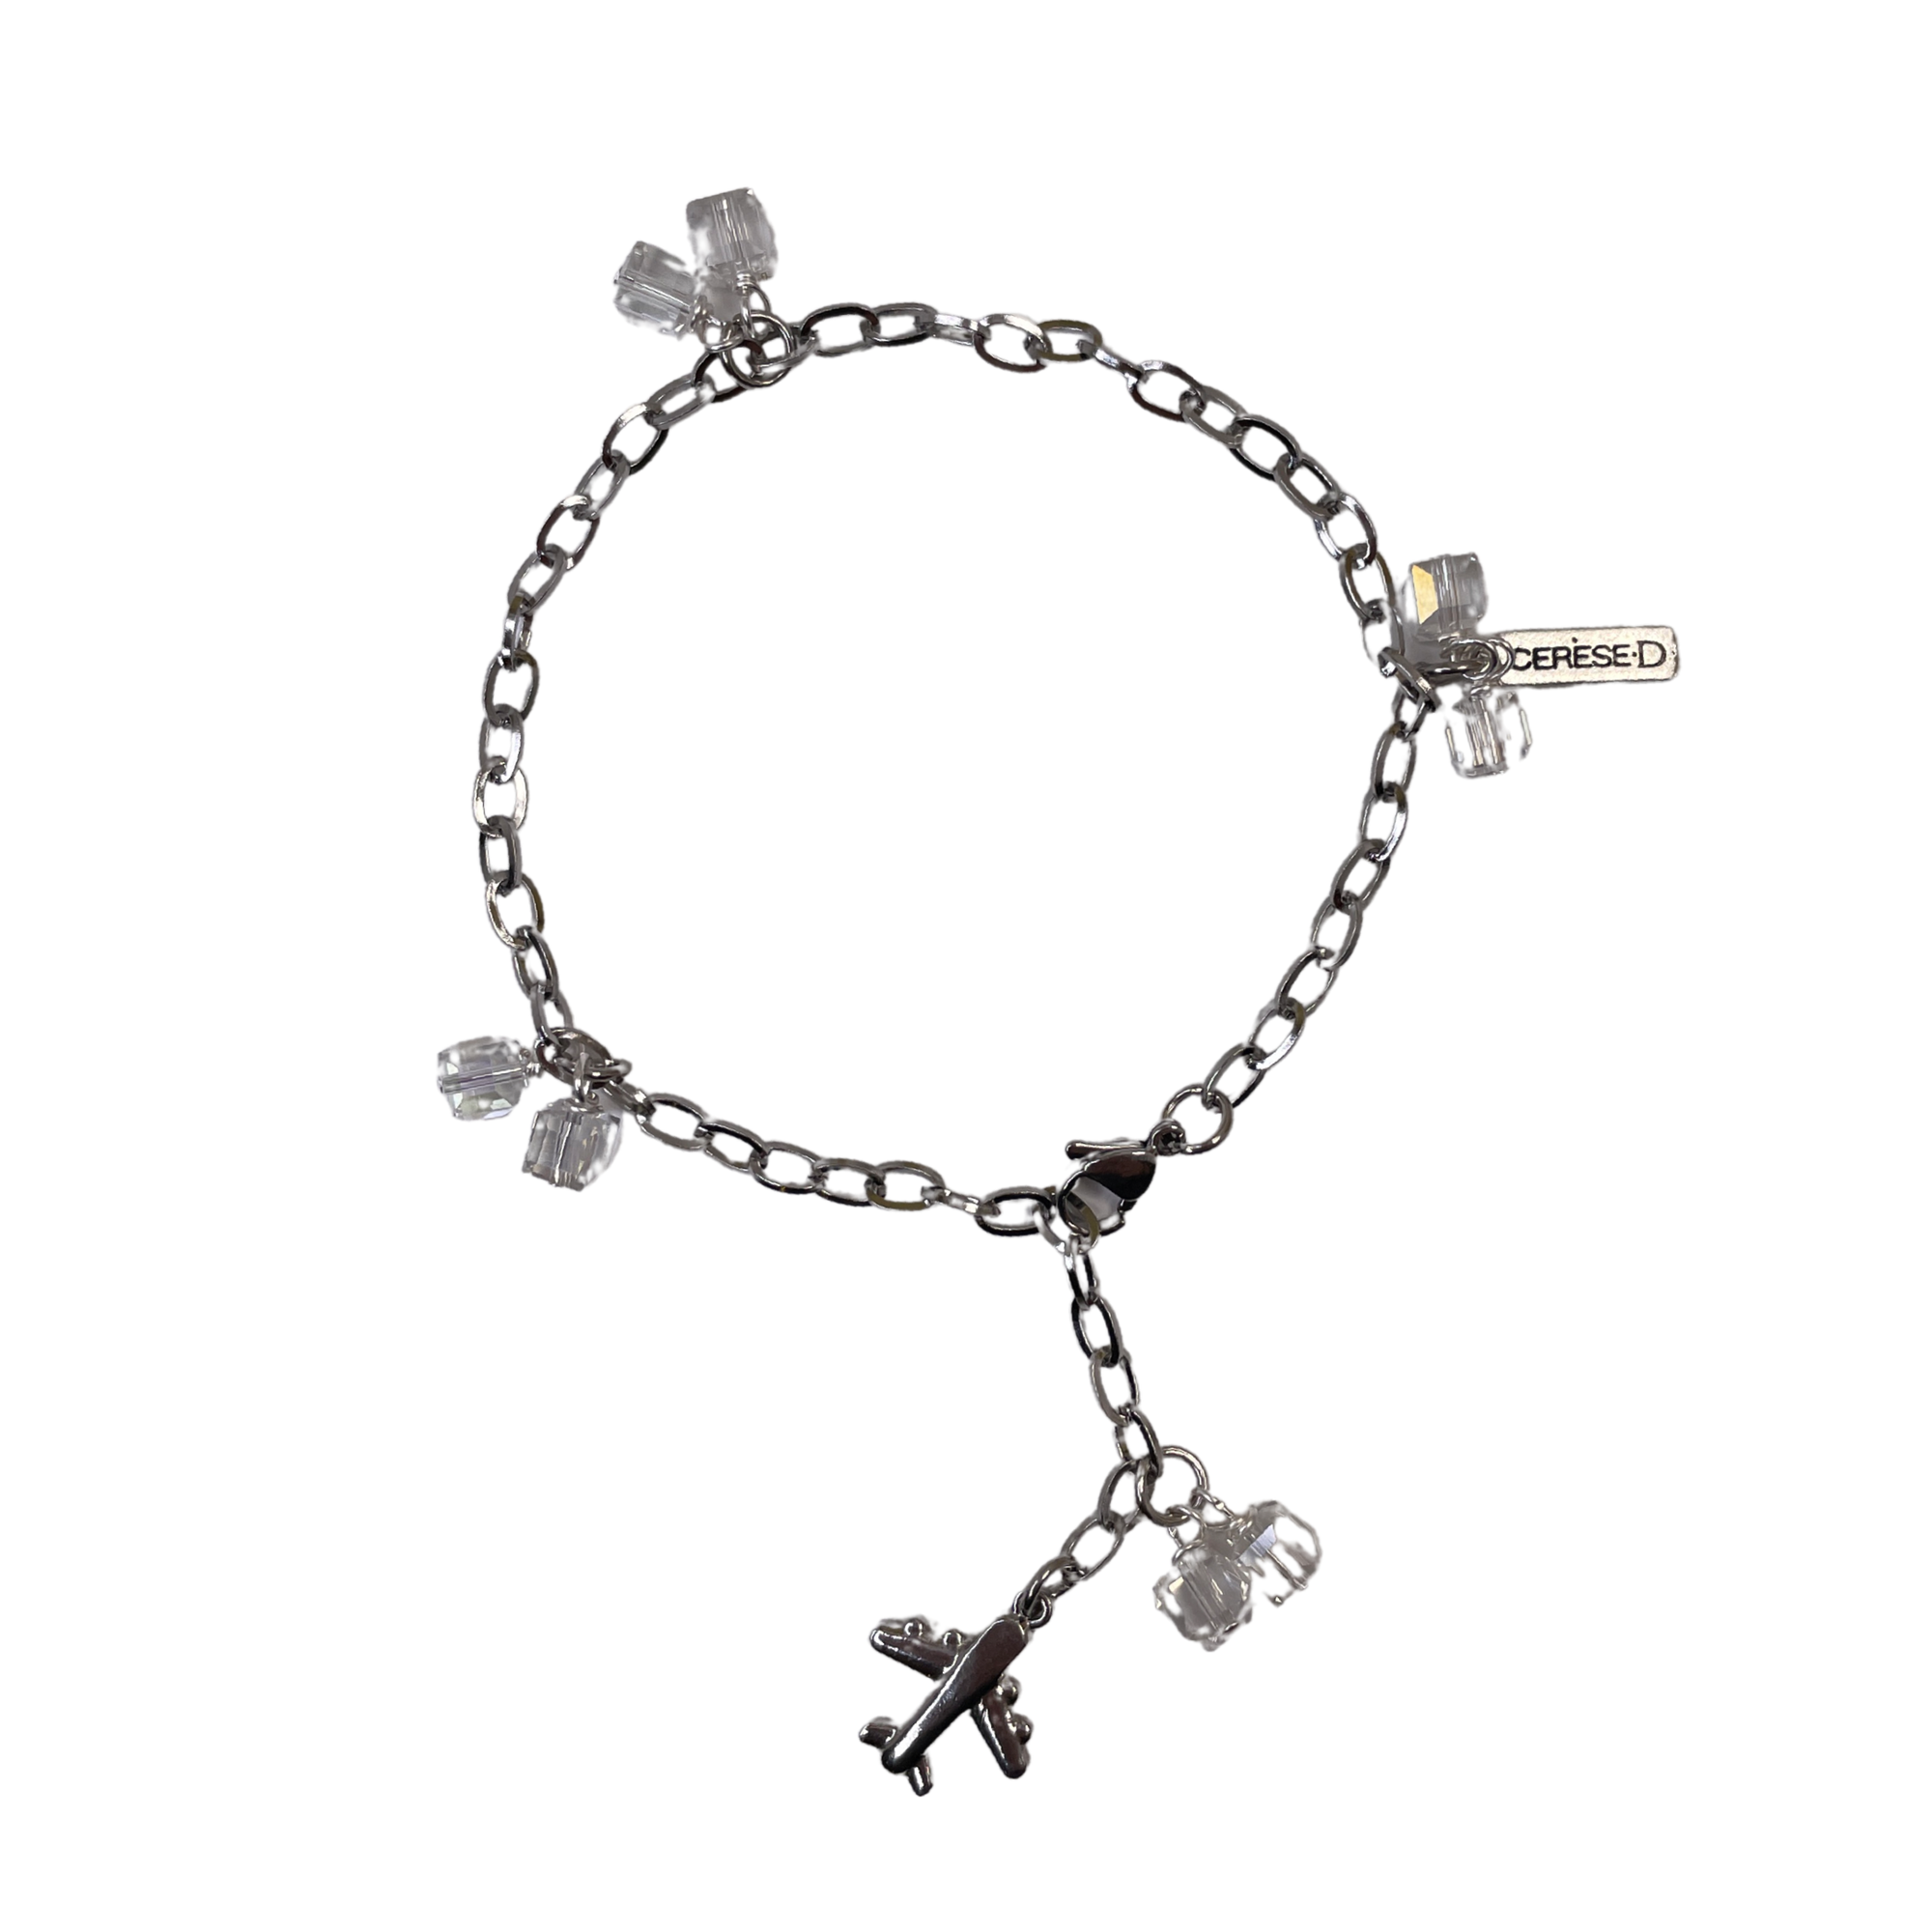 Caribbean Cruise Anklet Anklets Cerese D, Inc. Silver Airplane 10"